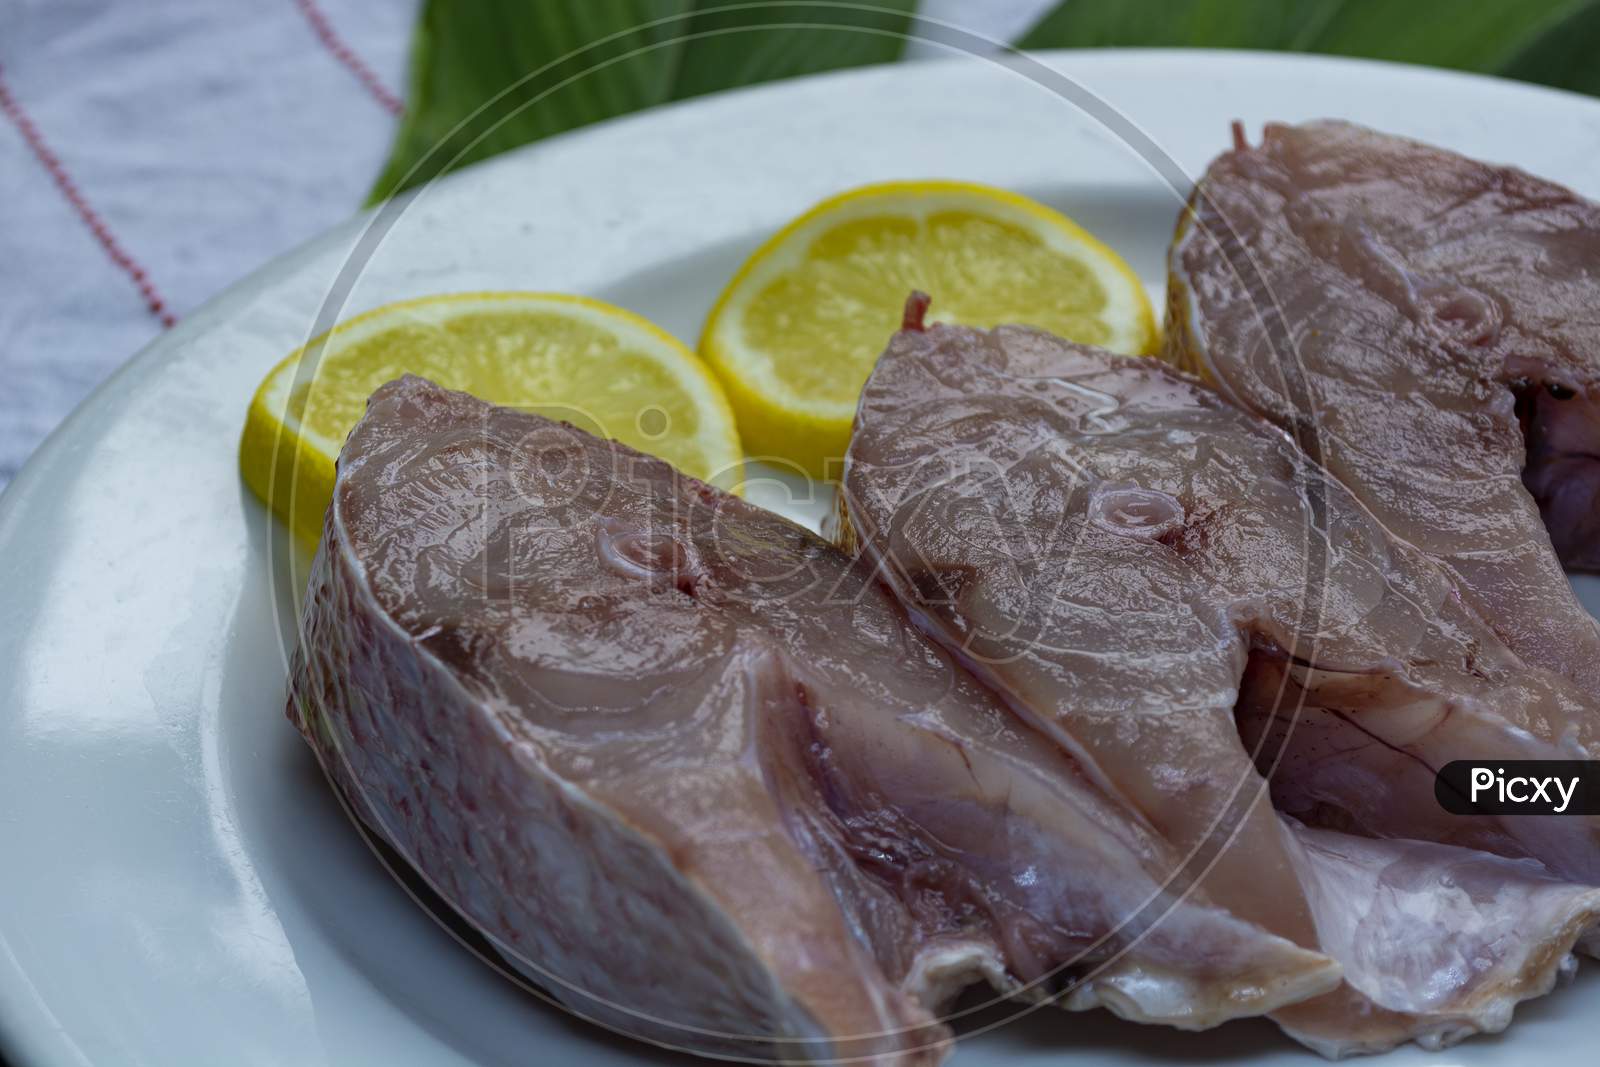 Fresh Raw Fish On White Plate With Green Leaf And Lemon